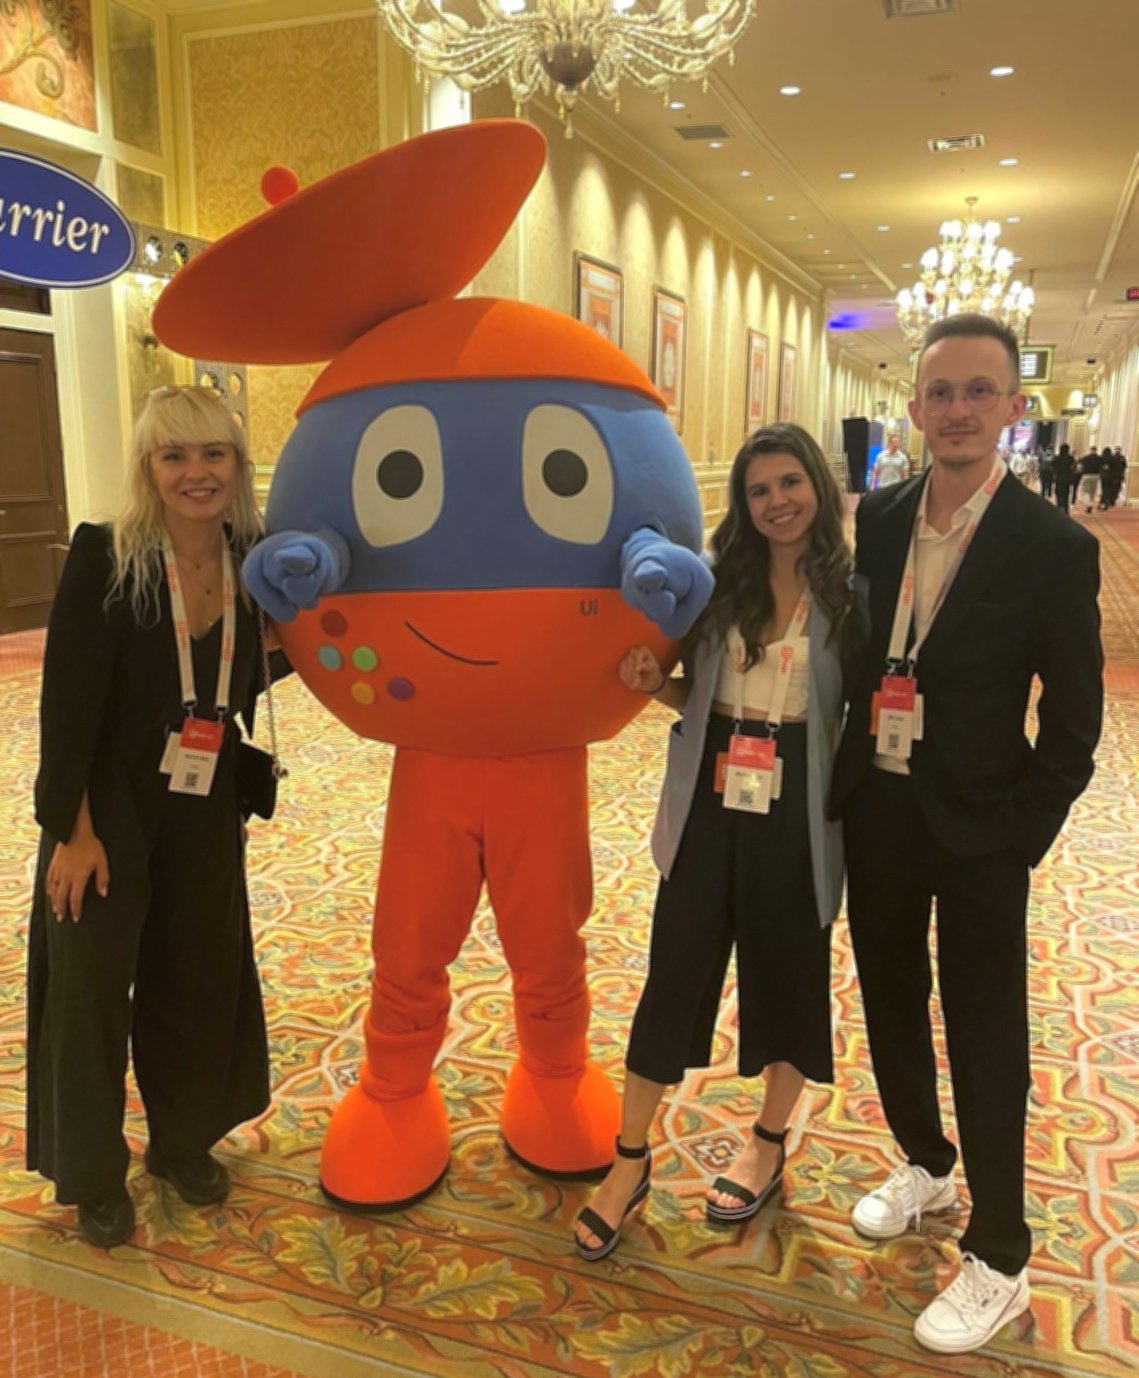 a group photo with Alexandra, one of the UiPath robot mascots, and other colleagues